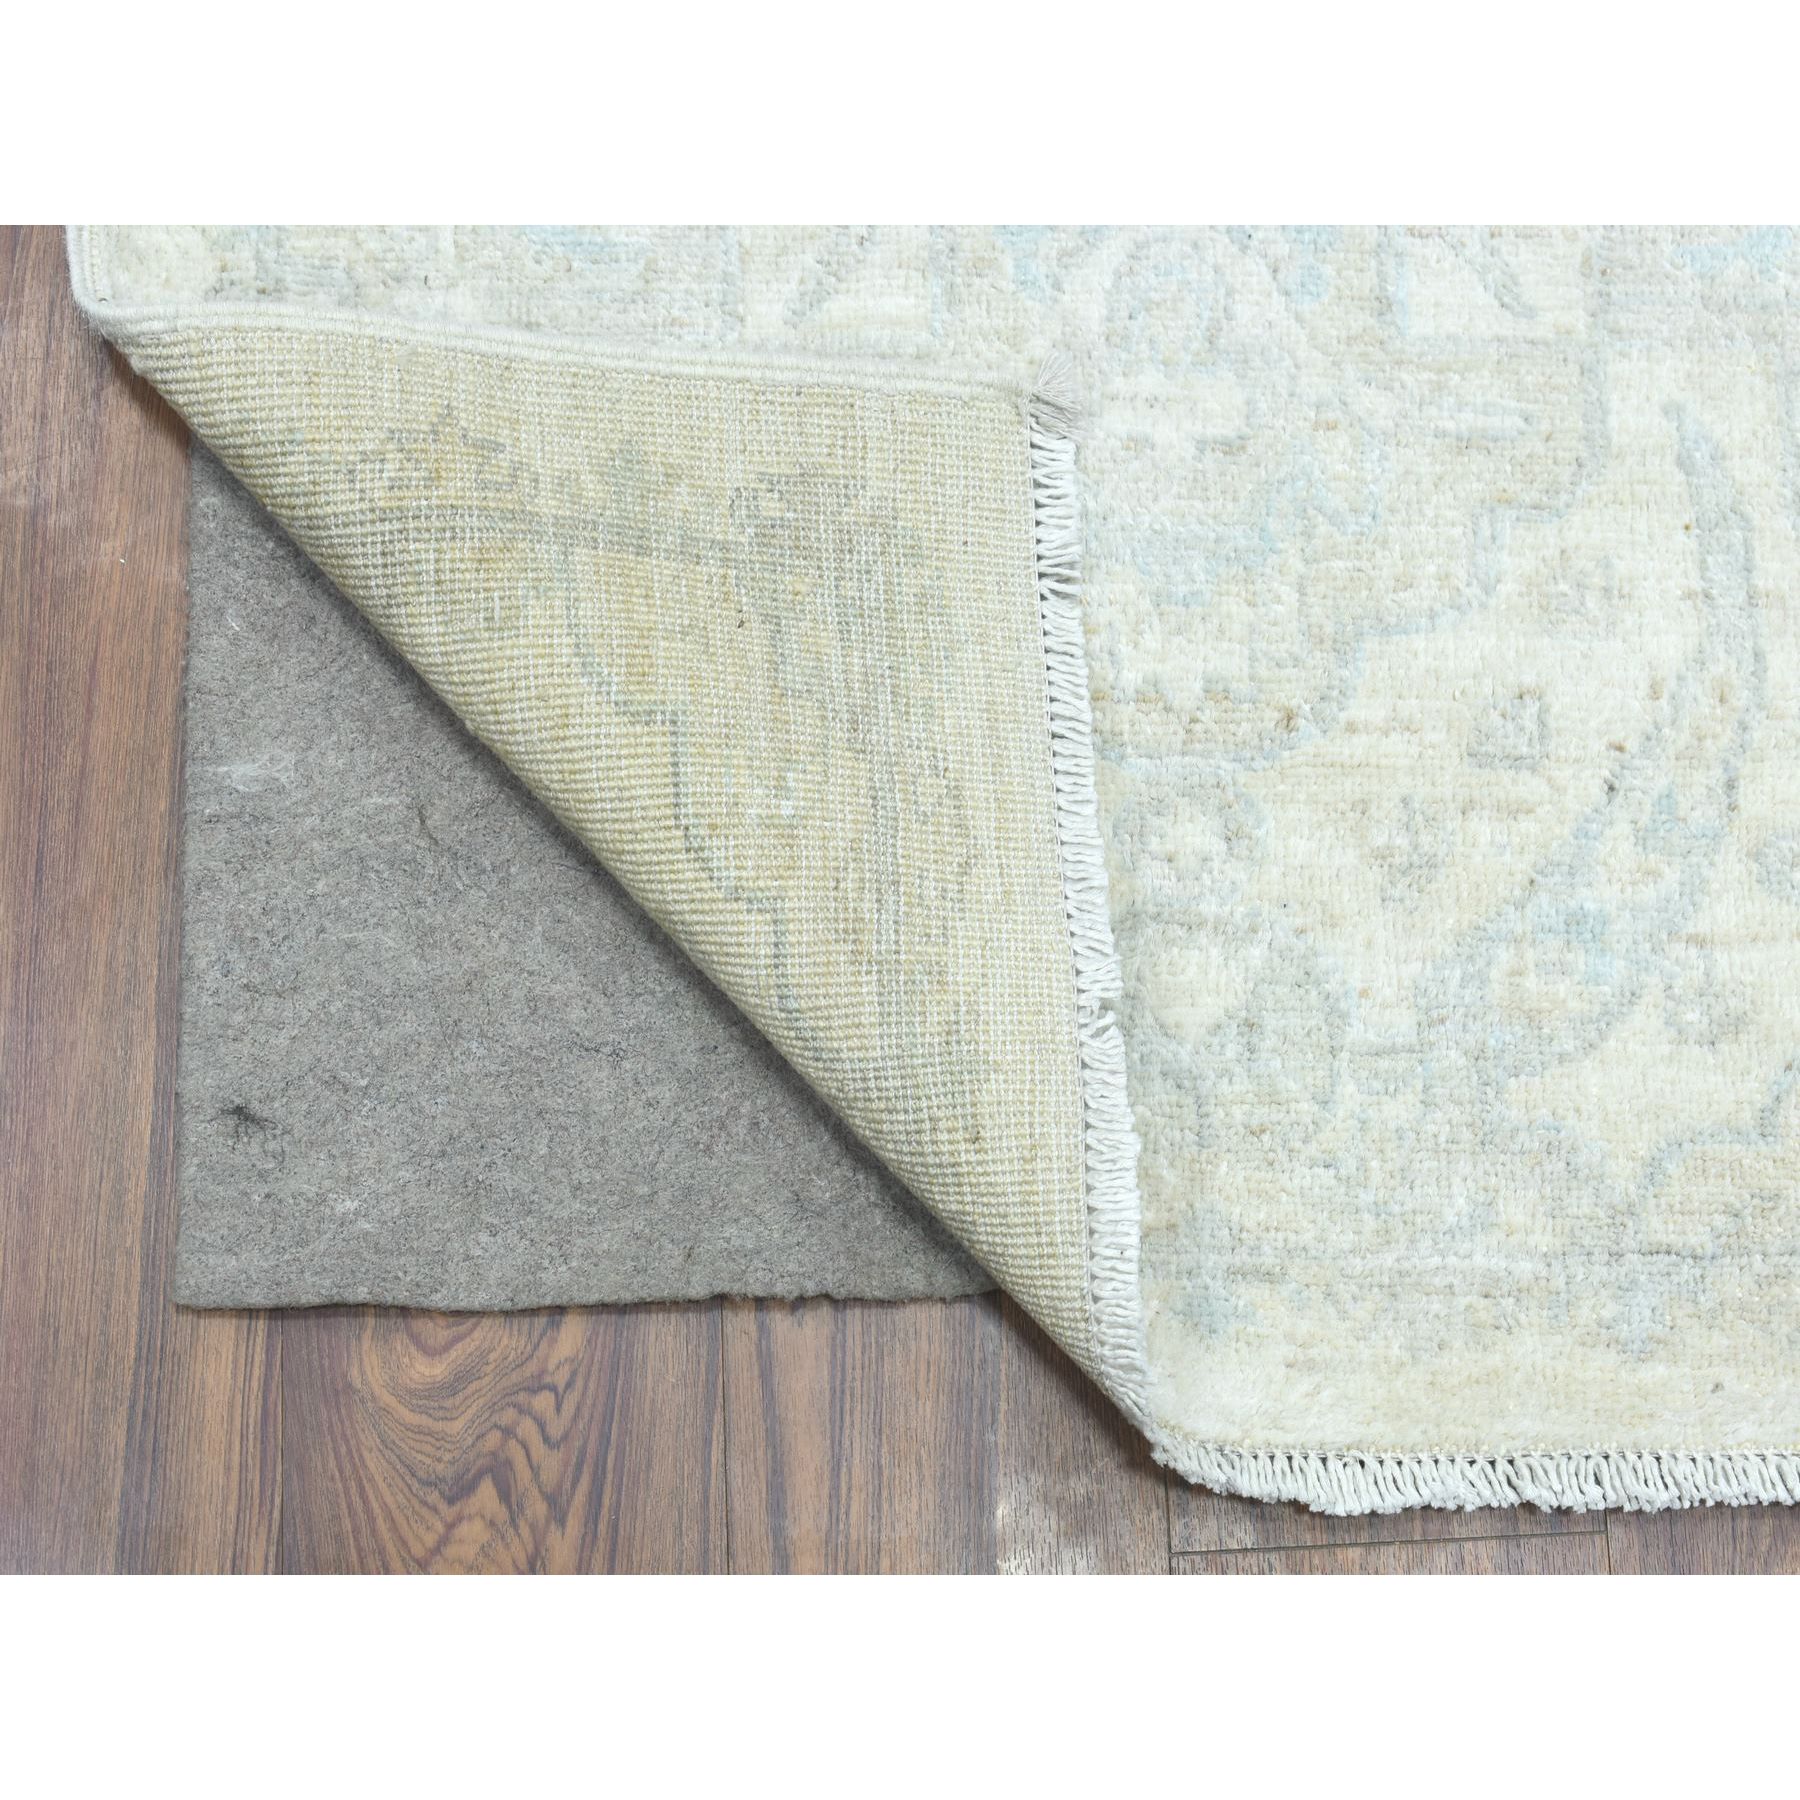 2'6"x19'4" Ivory, Soft and Shiny Wool Hand Woven, White Wash Peshawar Natural Dyes, XL Runner Oriental Rug 